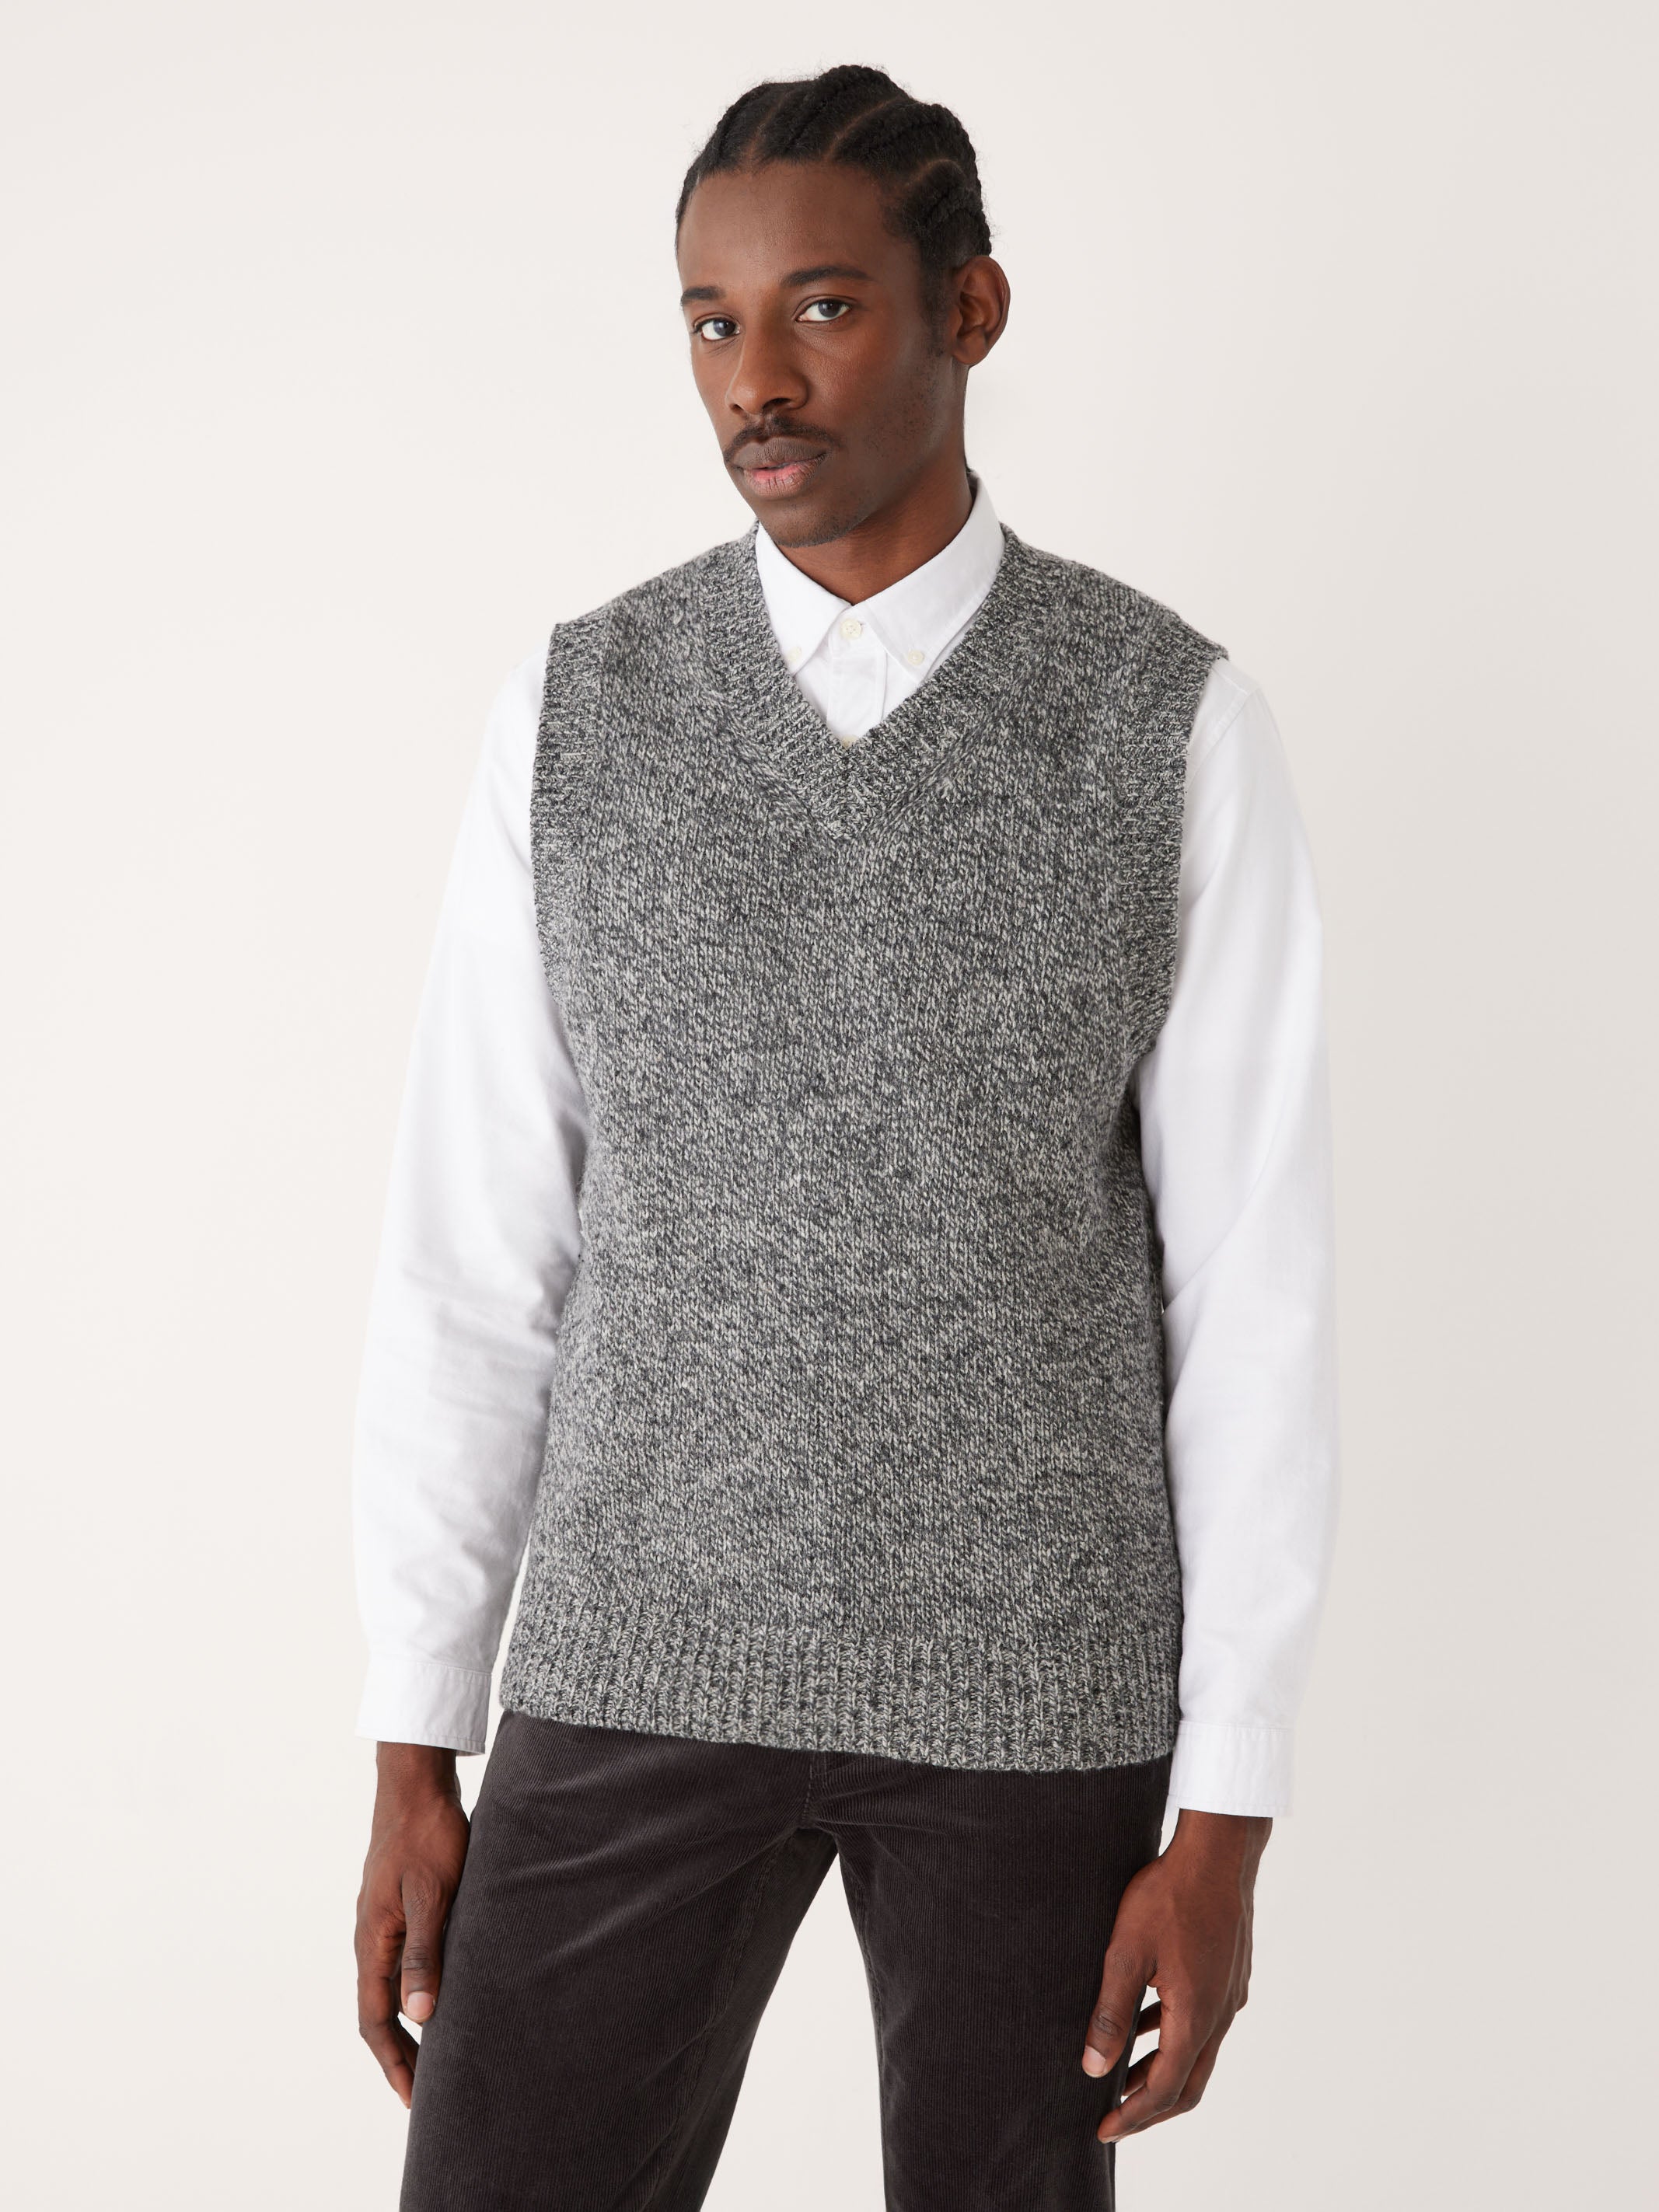 The Donegal Sweater Vest in Charcoal